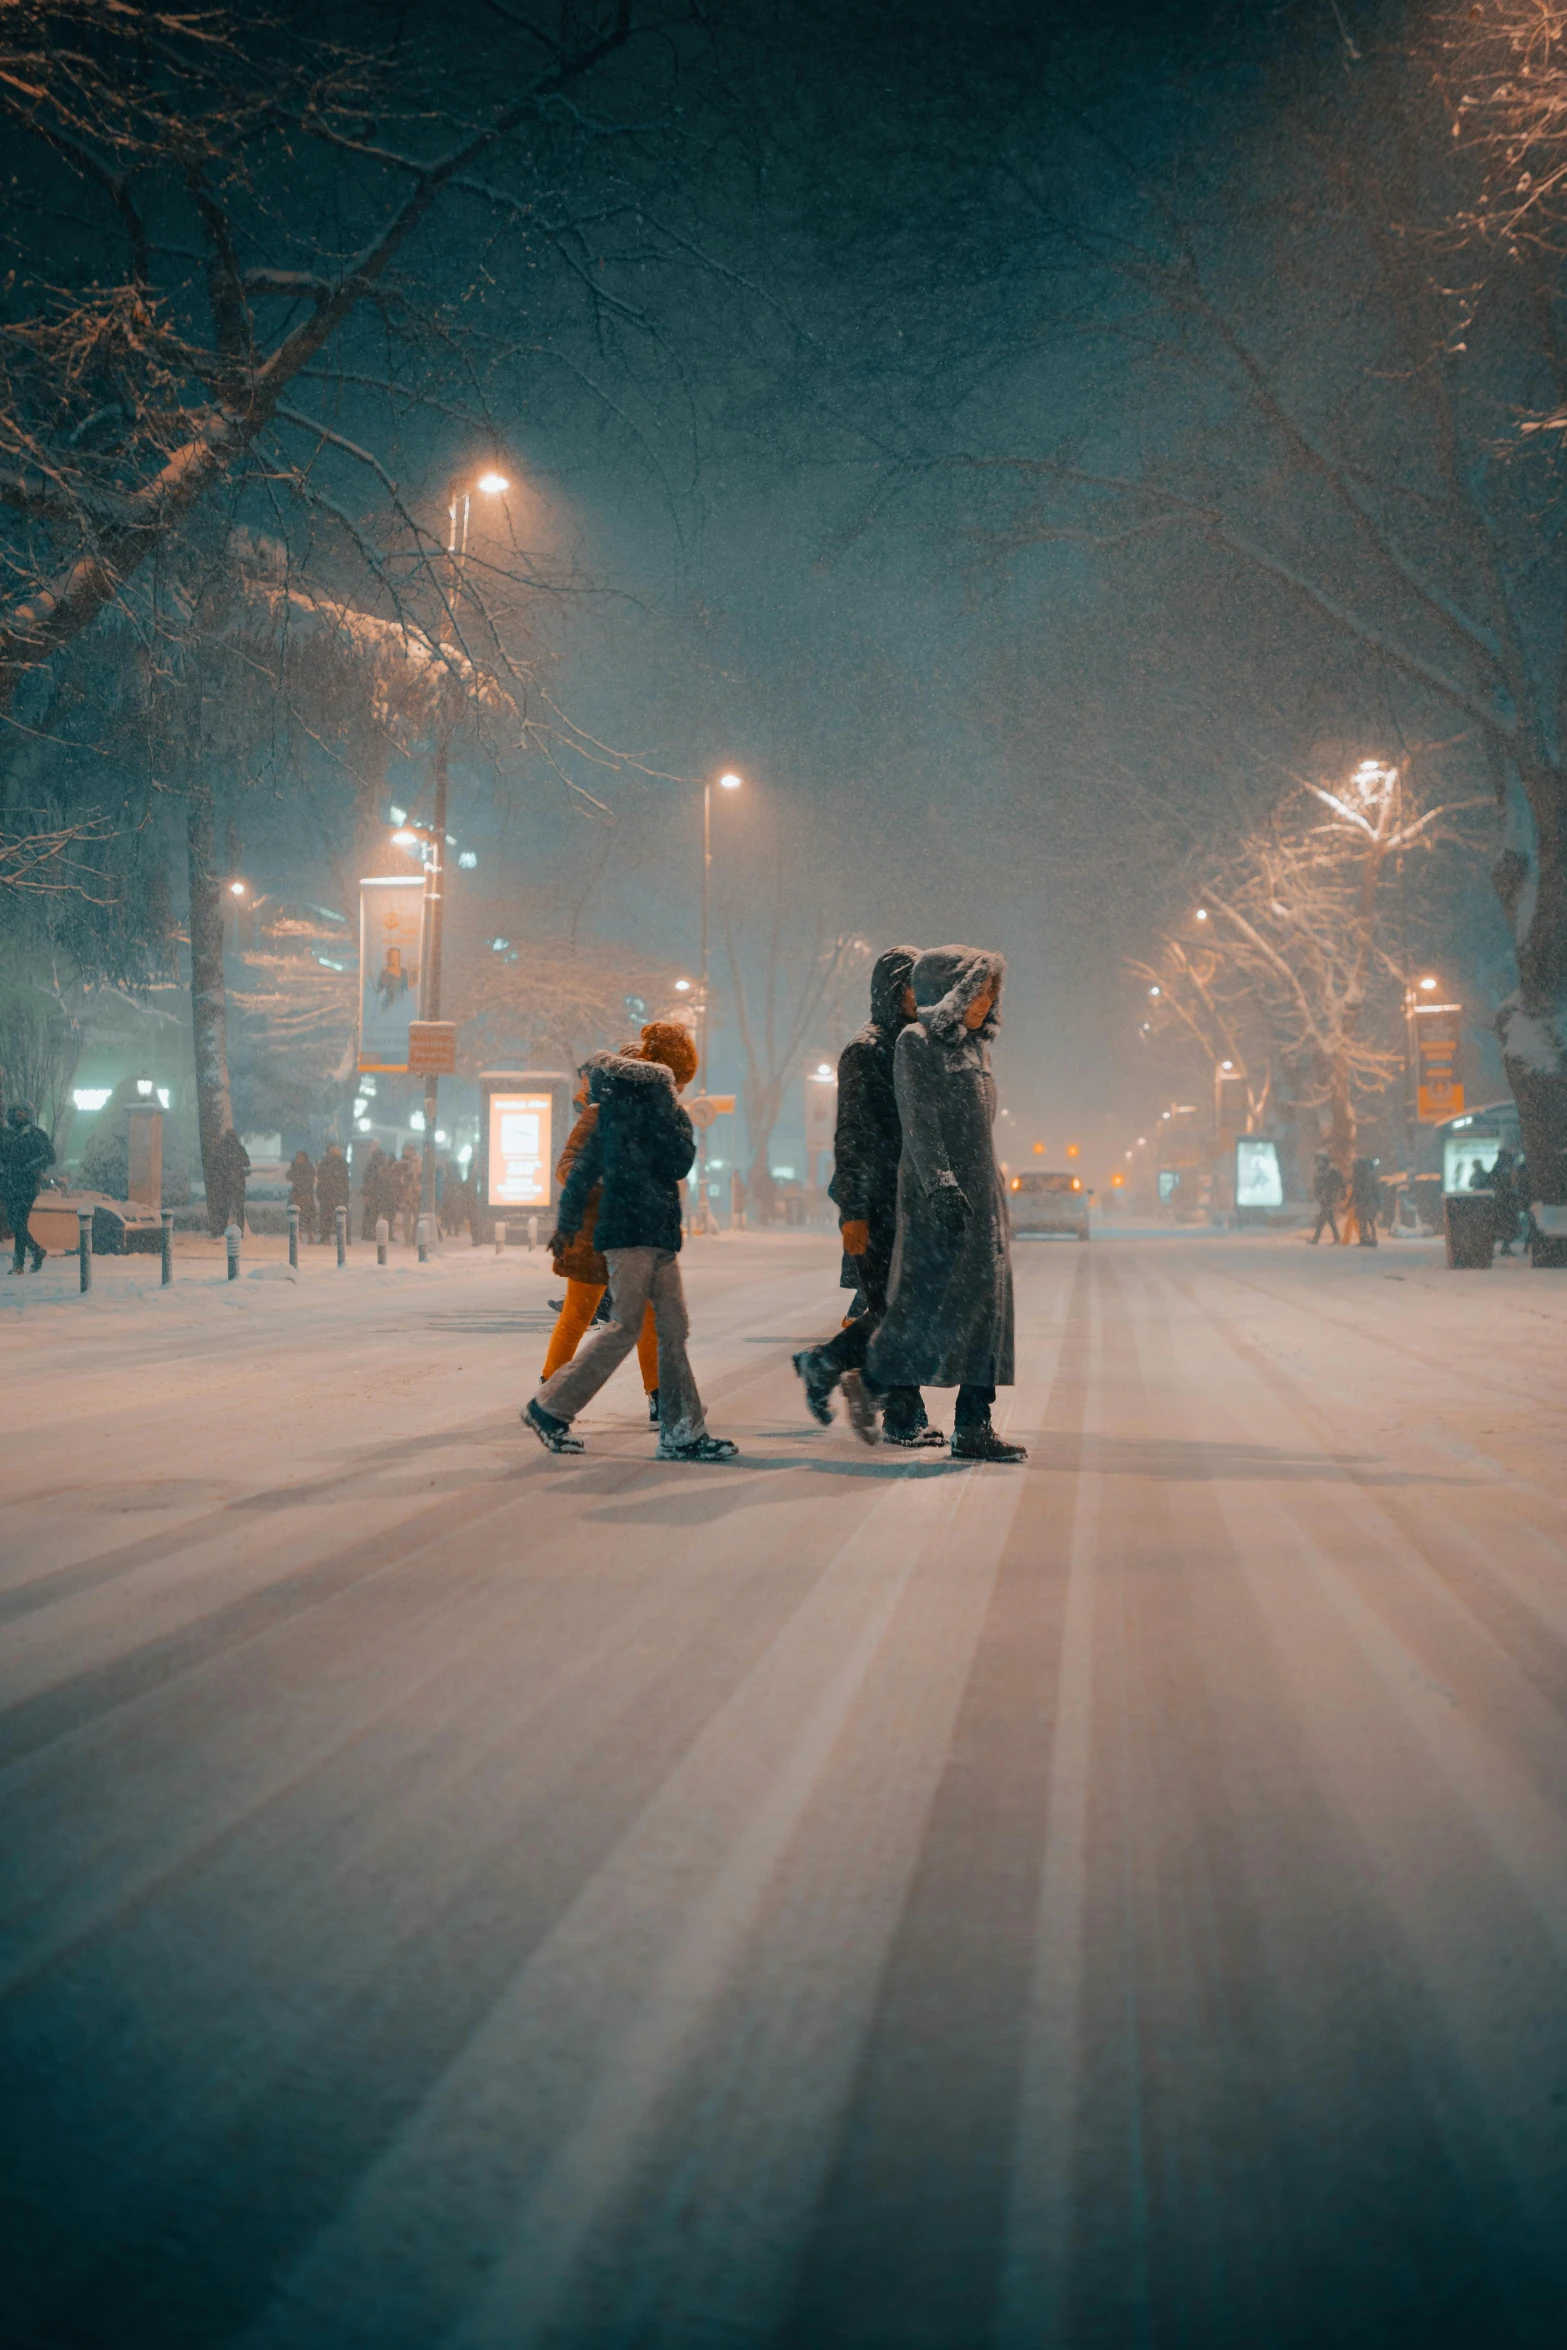 two people walking down a snow covered street at night